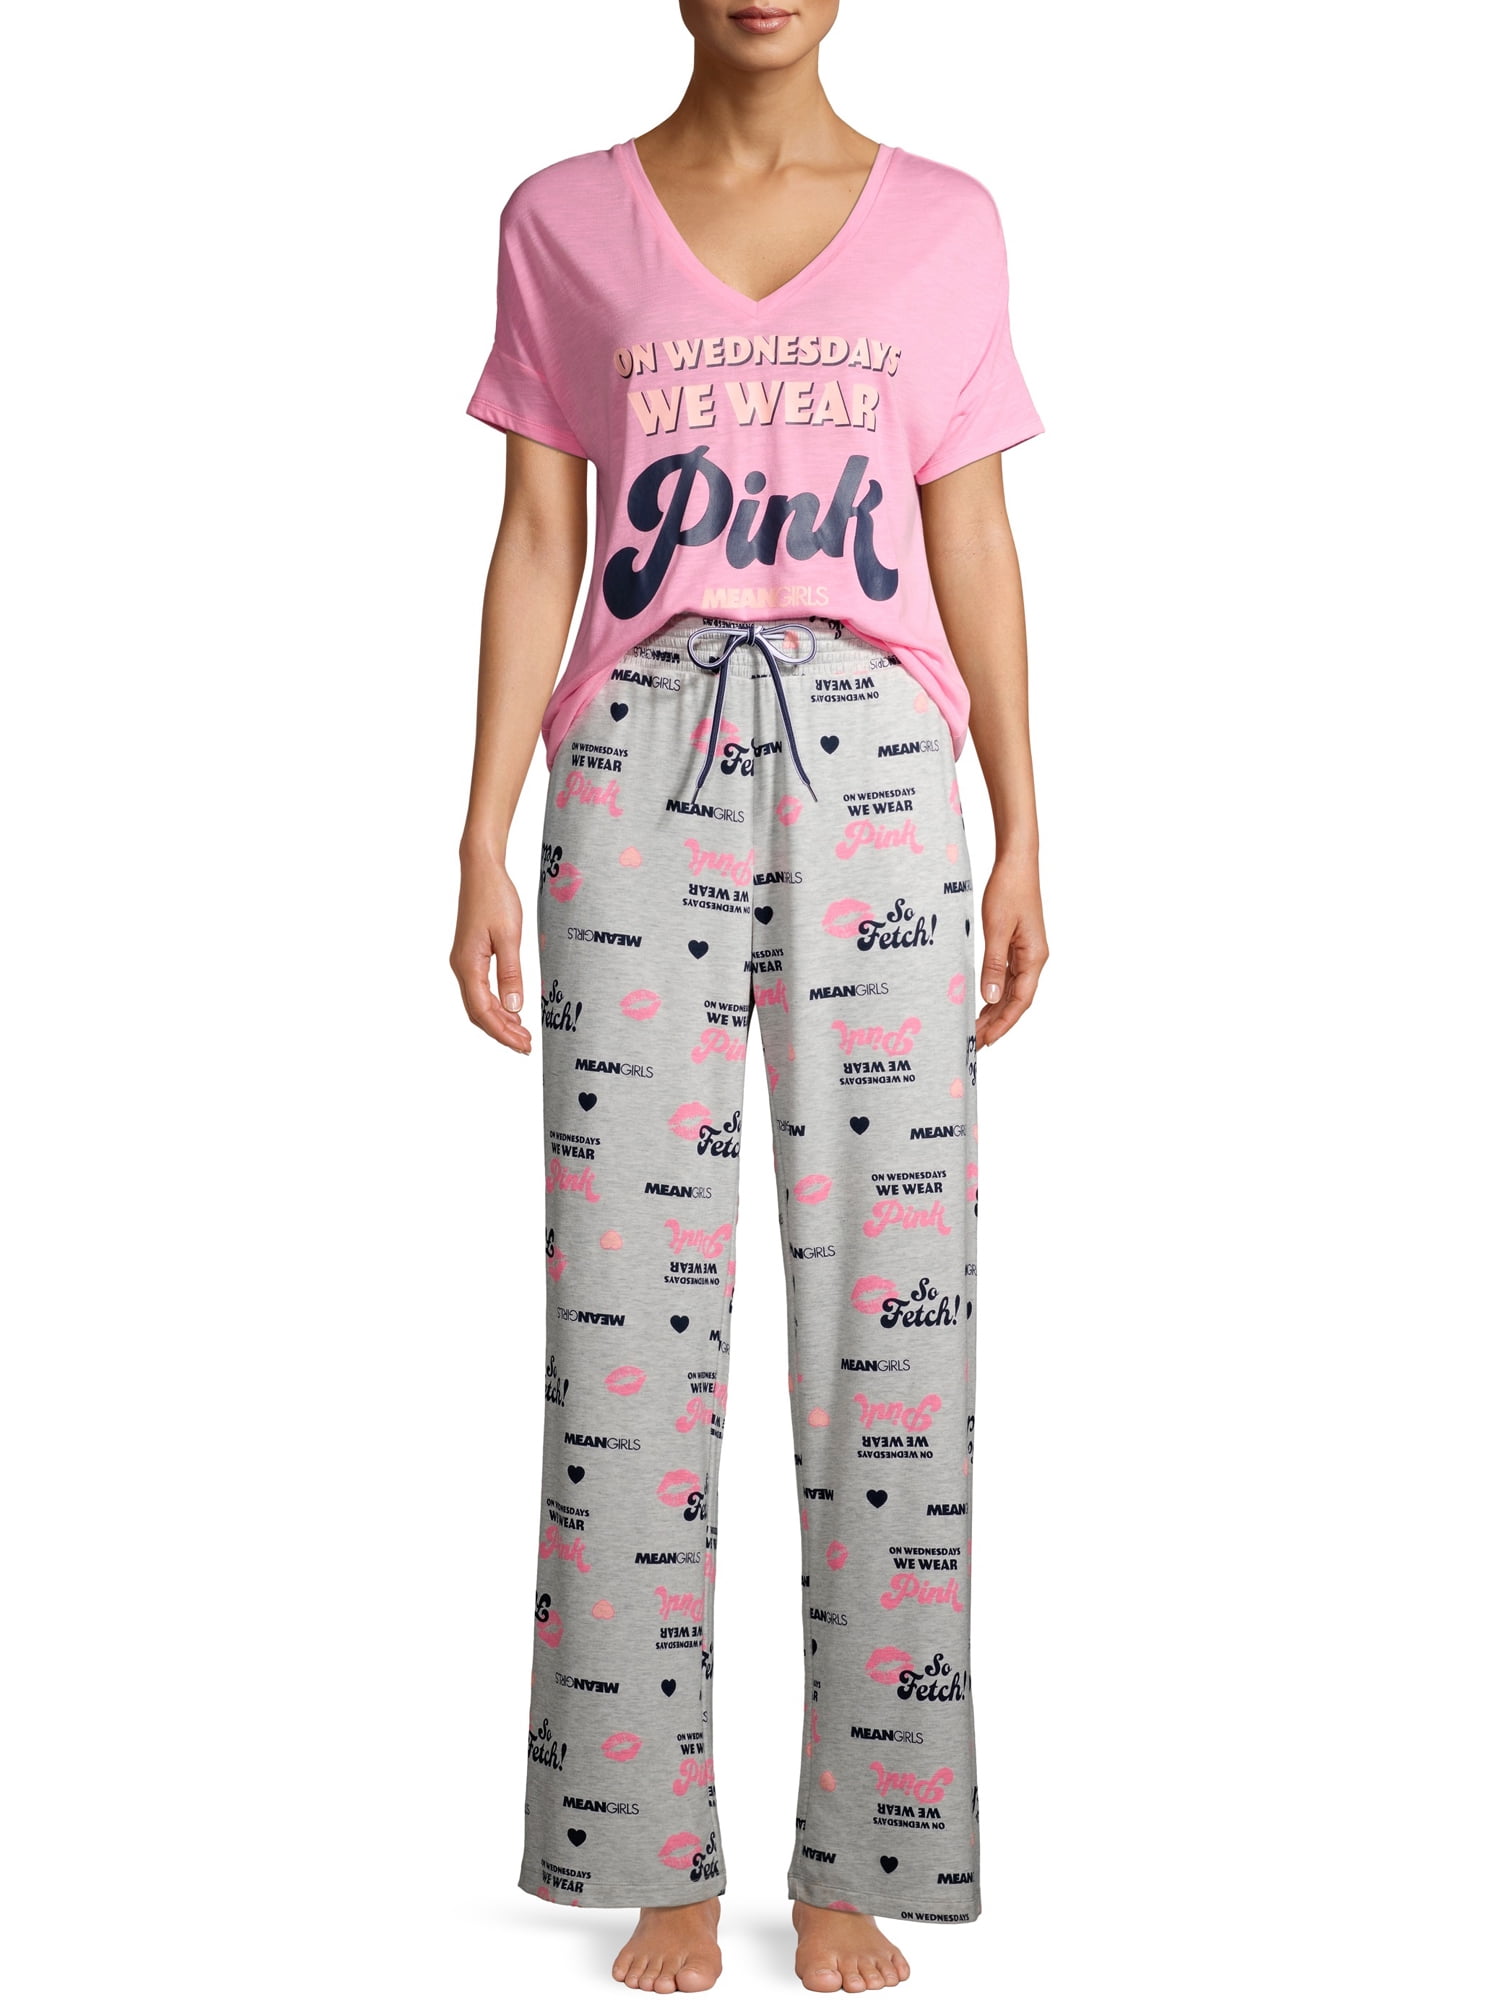 Mean Girls Women's and Women's Plus Short Sleeve Top and Pants Sleep Set